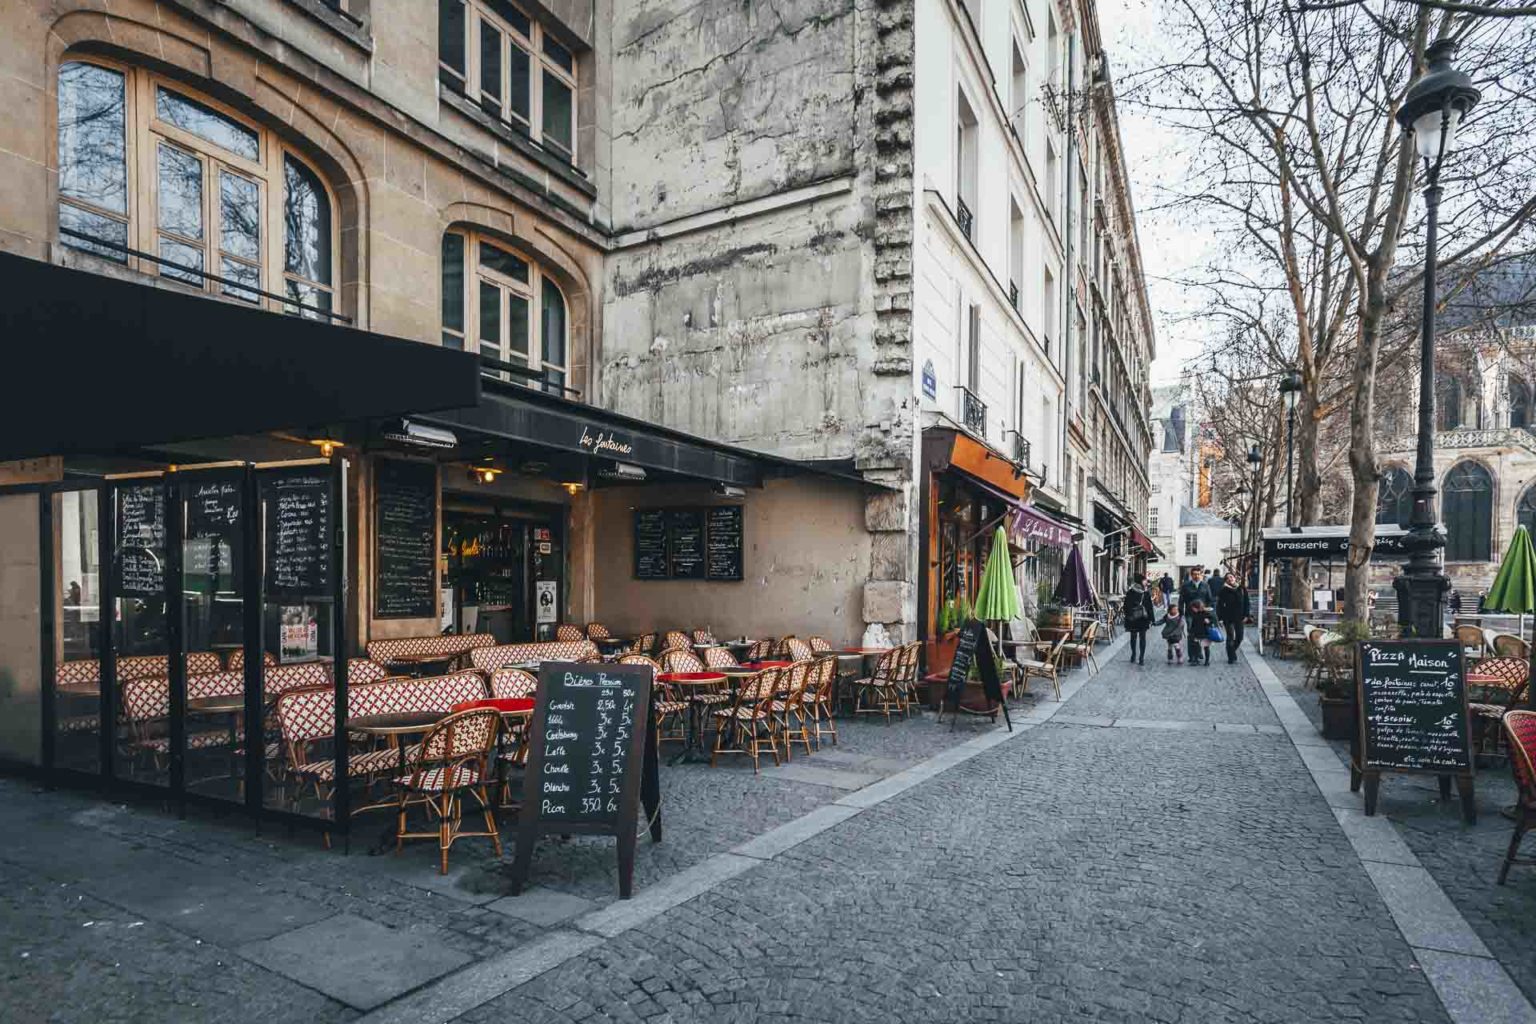 Where To Stay In Paris - Best Neighborhoods and Hotels | The Planet D